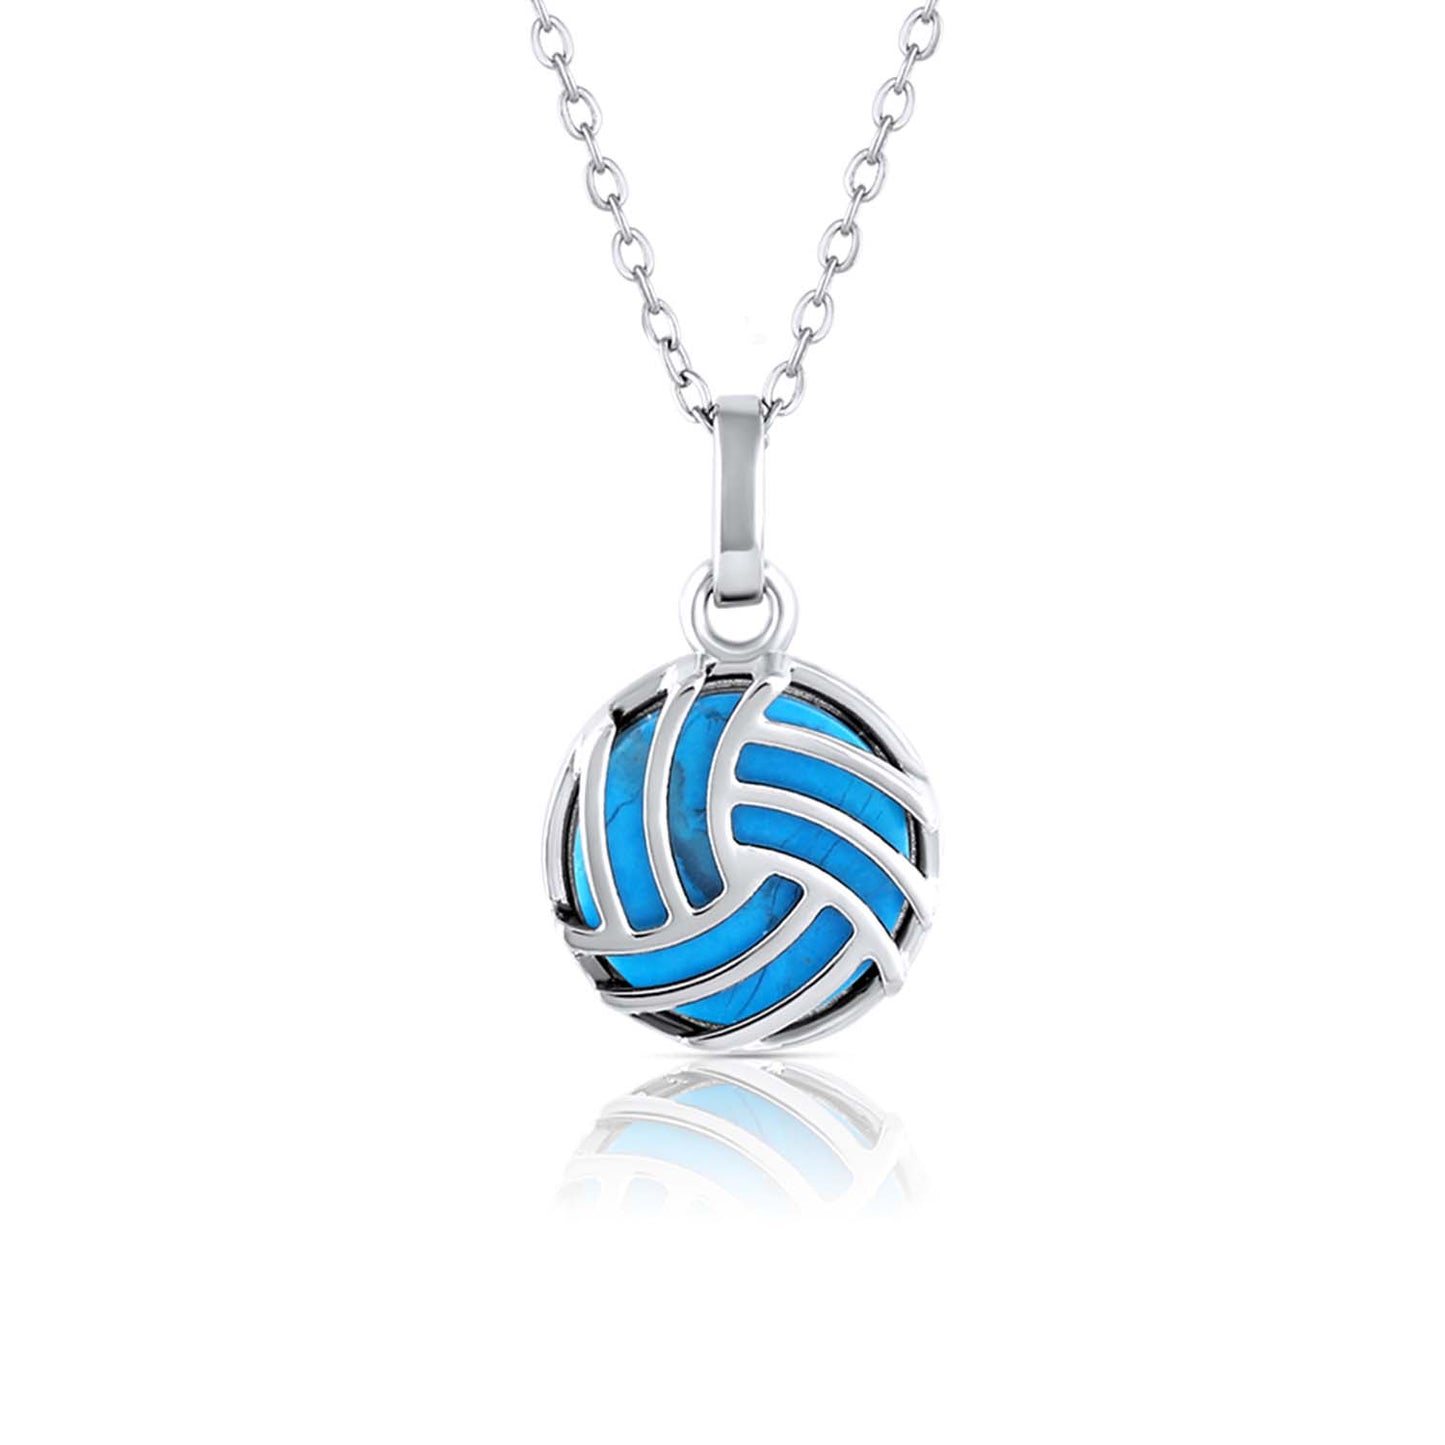 Volleyball charm necklace, handmade jewelry made by born to rock jewelry